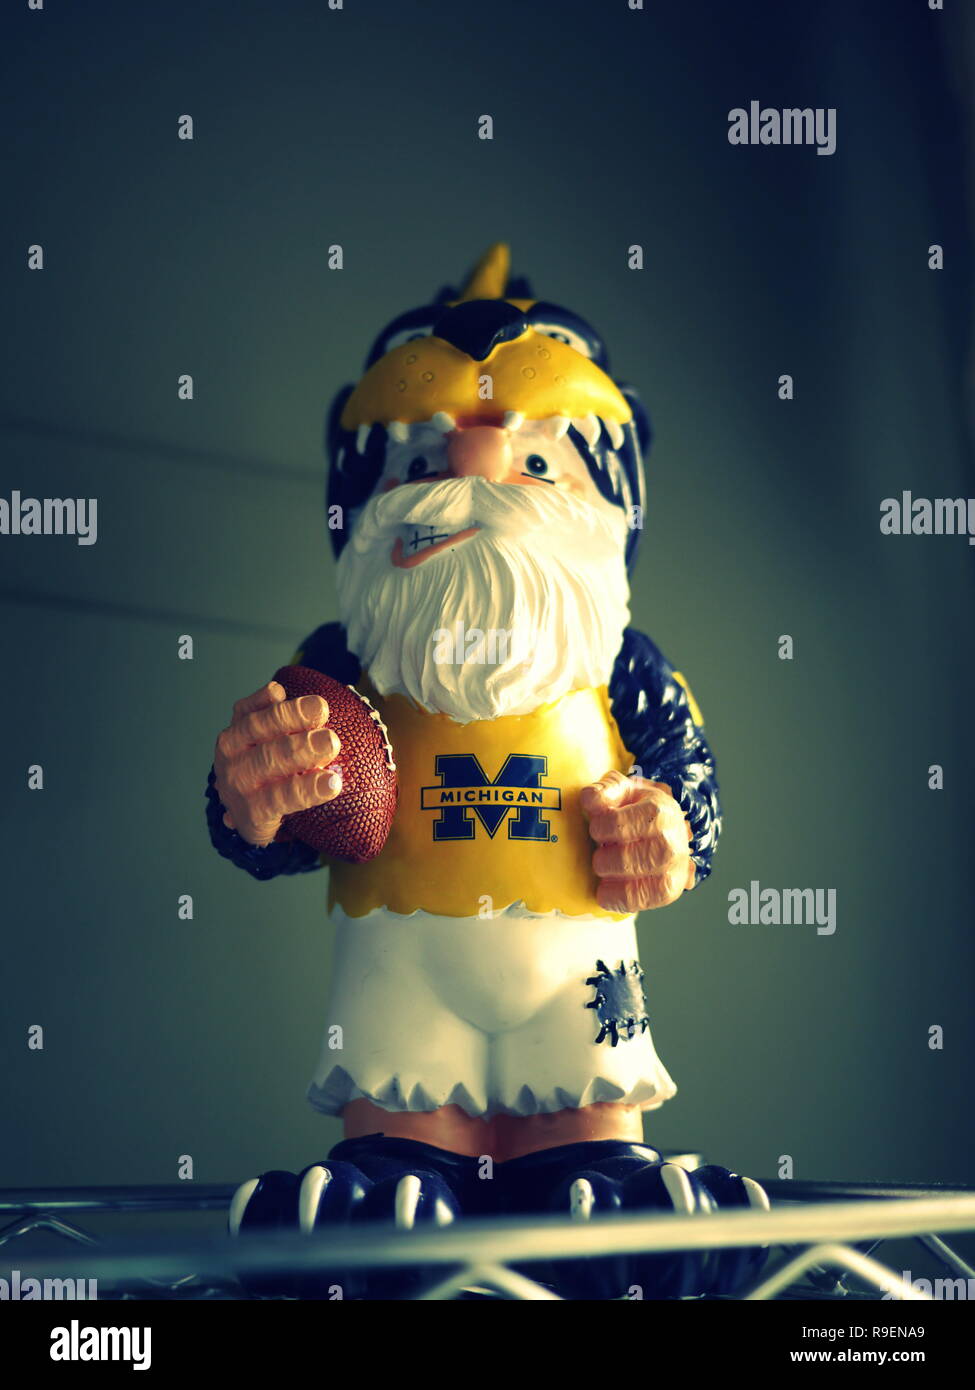 Silver Spring, MD - June 8, 2013: Image of Garden Gnome Dressed in University of Michigan Athletic Wear, Wolverine Hat and holding a football Stock Photo